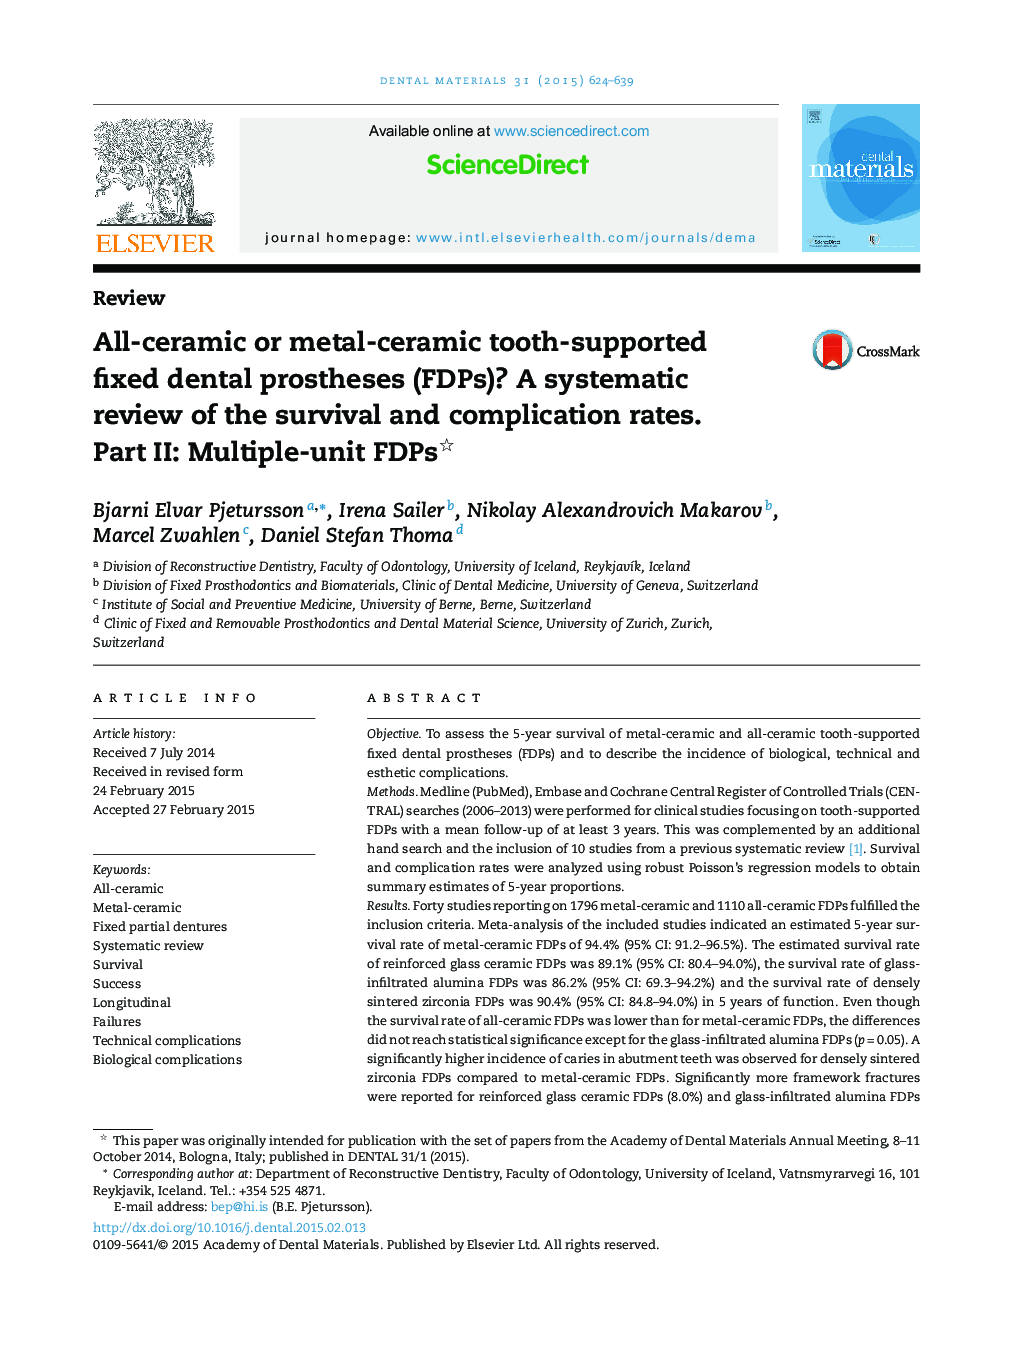 All-ceramic or metal-ceramic tooth-supported fixed dental prostheses (FDPs)? A systematic review of the survival and complication rates. Part II: Multiple-unit FDPs 